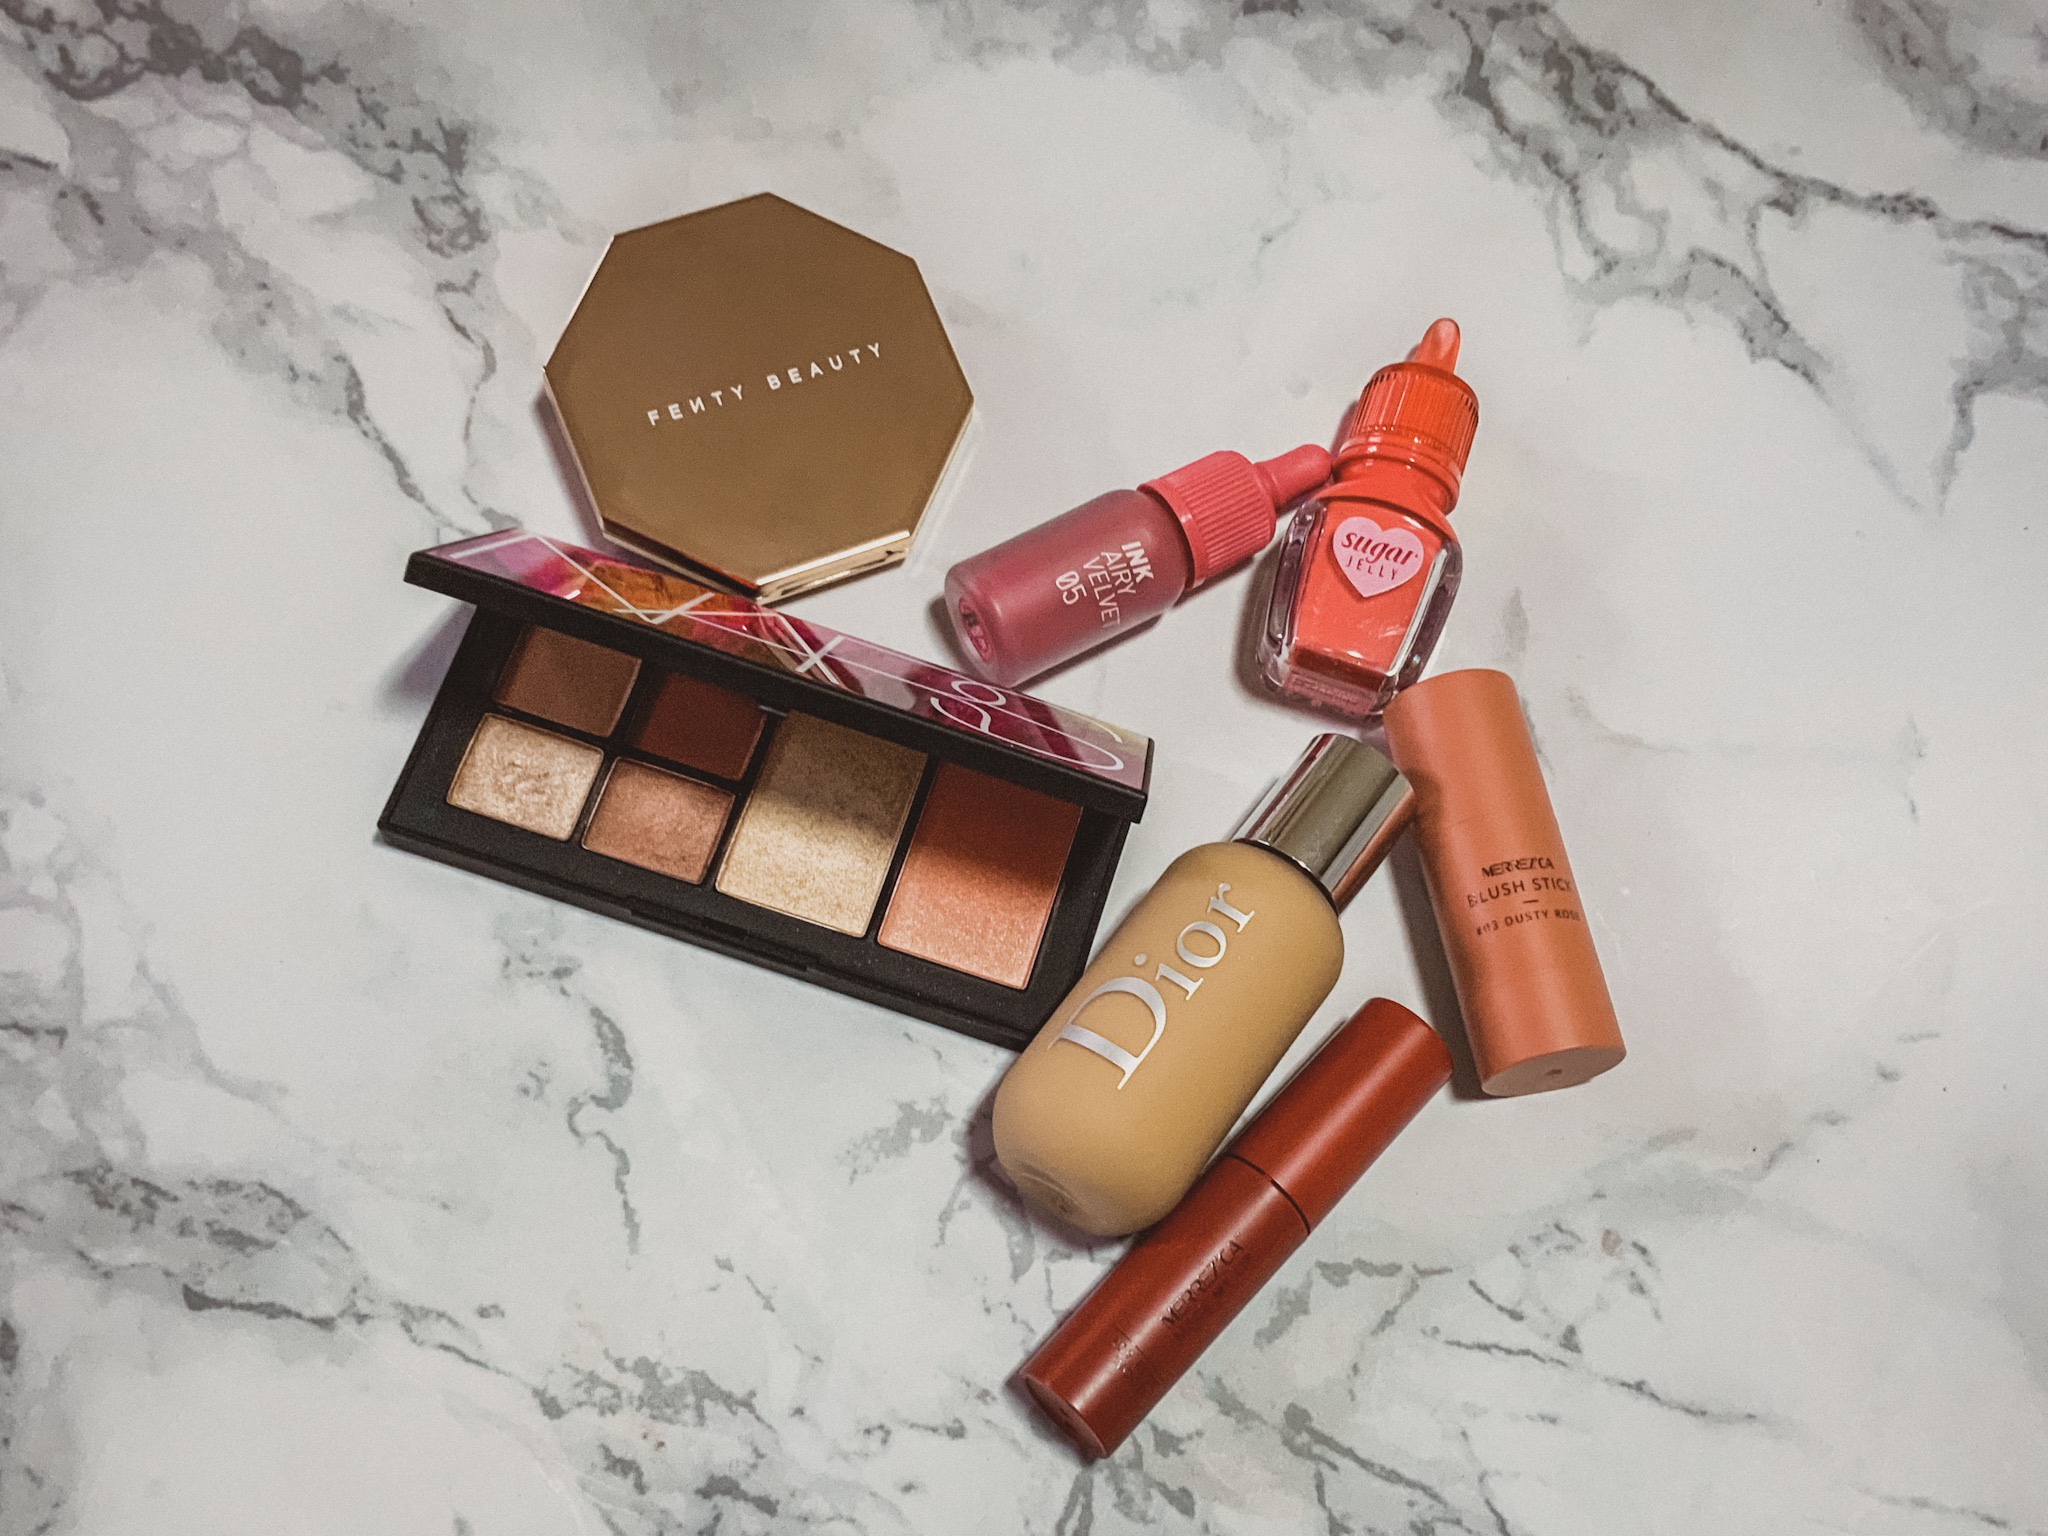 Travel Beauty Favourites Roundup: May 2019